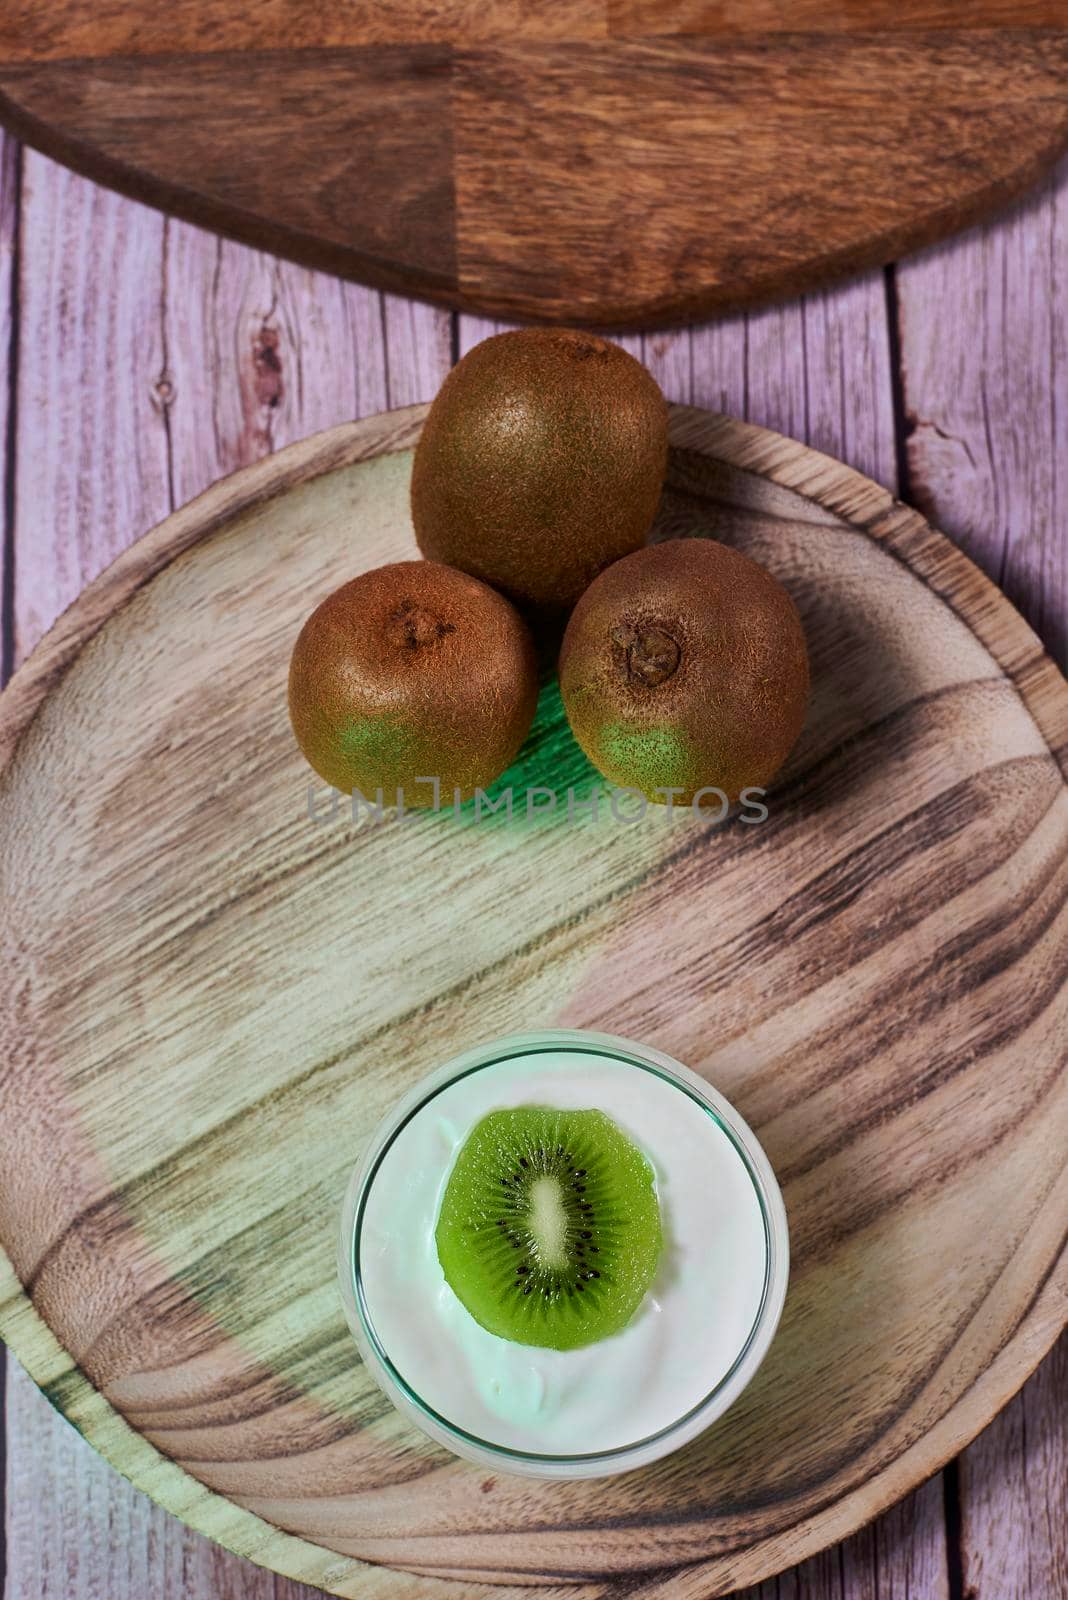 Yoghurt glass on wooden plate with kiwis. three kiwis, wooden floor and wooden tray.